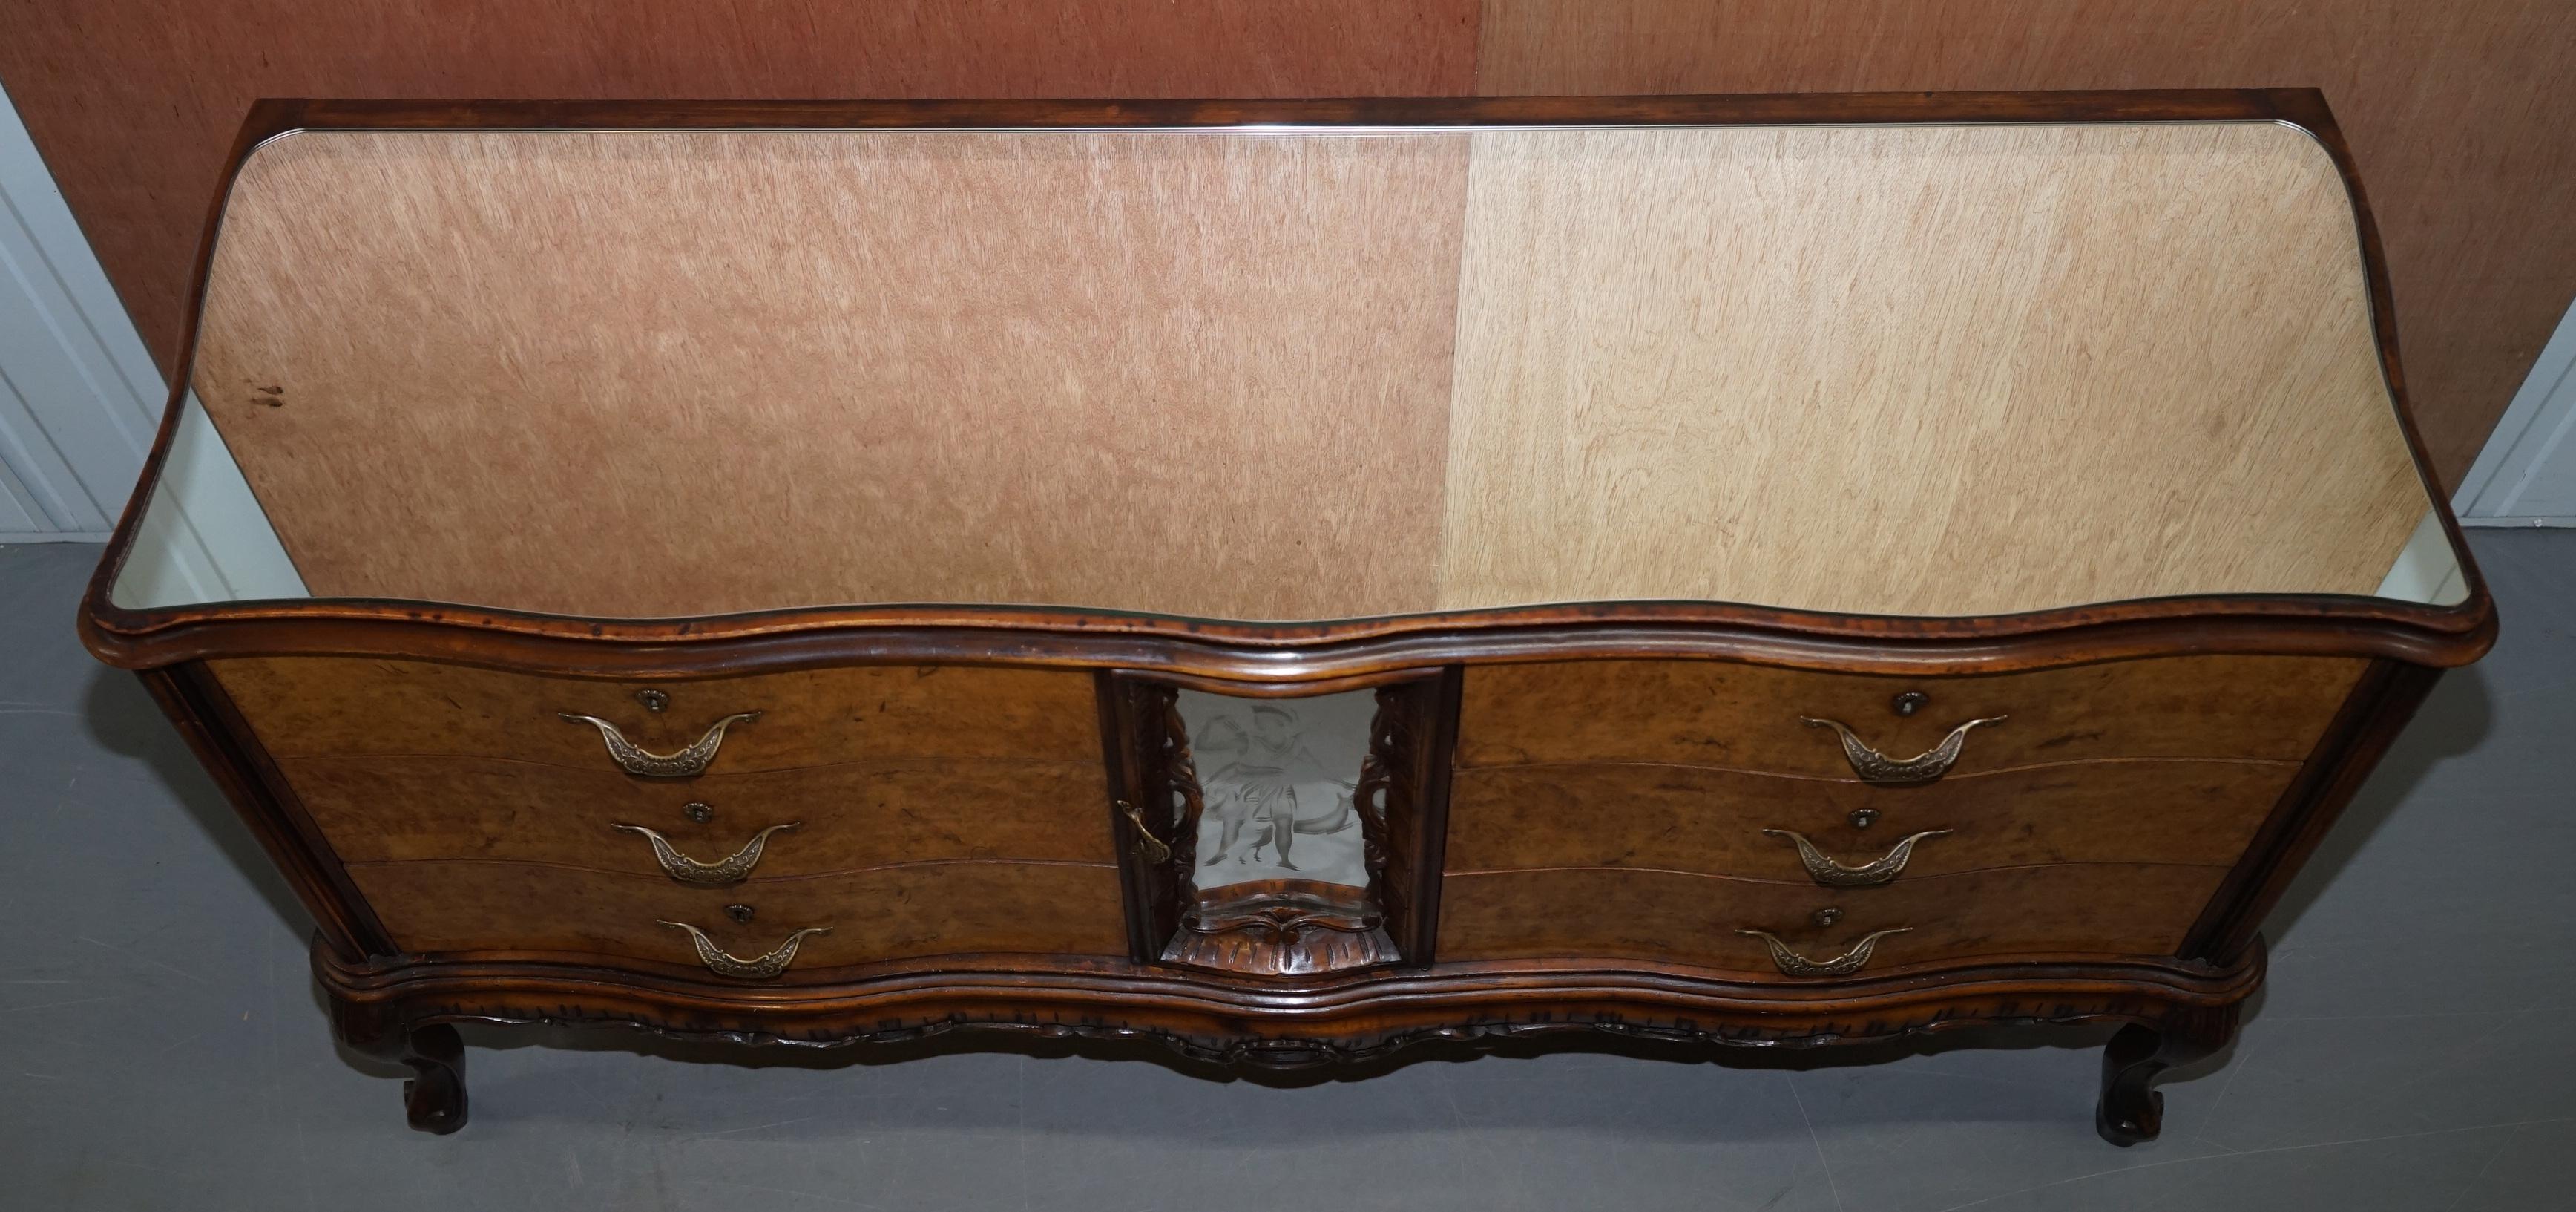 20th Century Sublime Vintage Italian Burr Walnut Serpentine Fronted Sideboard Mirrored Top For Sale